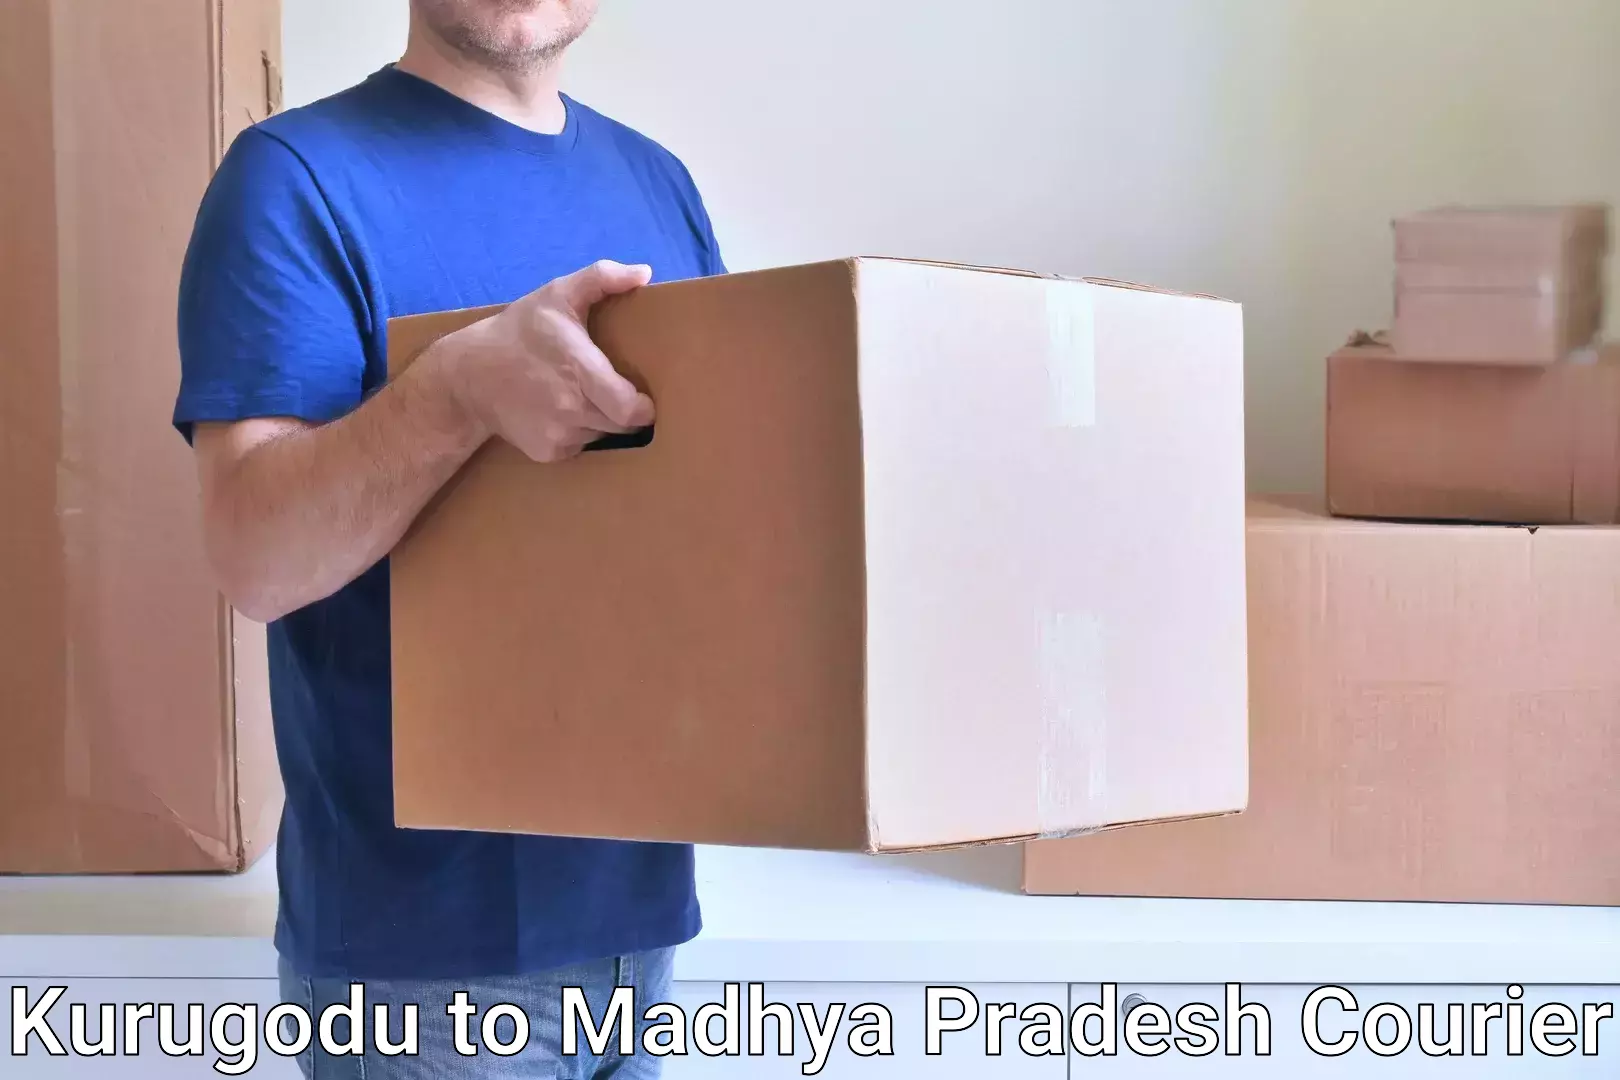 Reliable courier service in Kurugodu to Jawad Neemuch